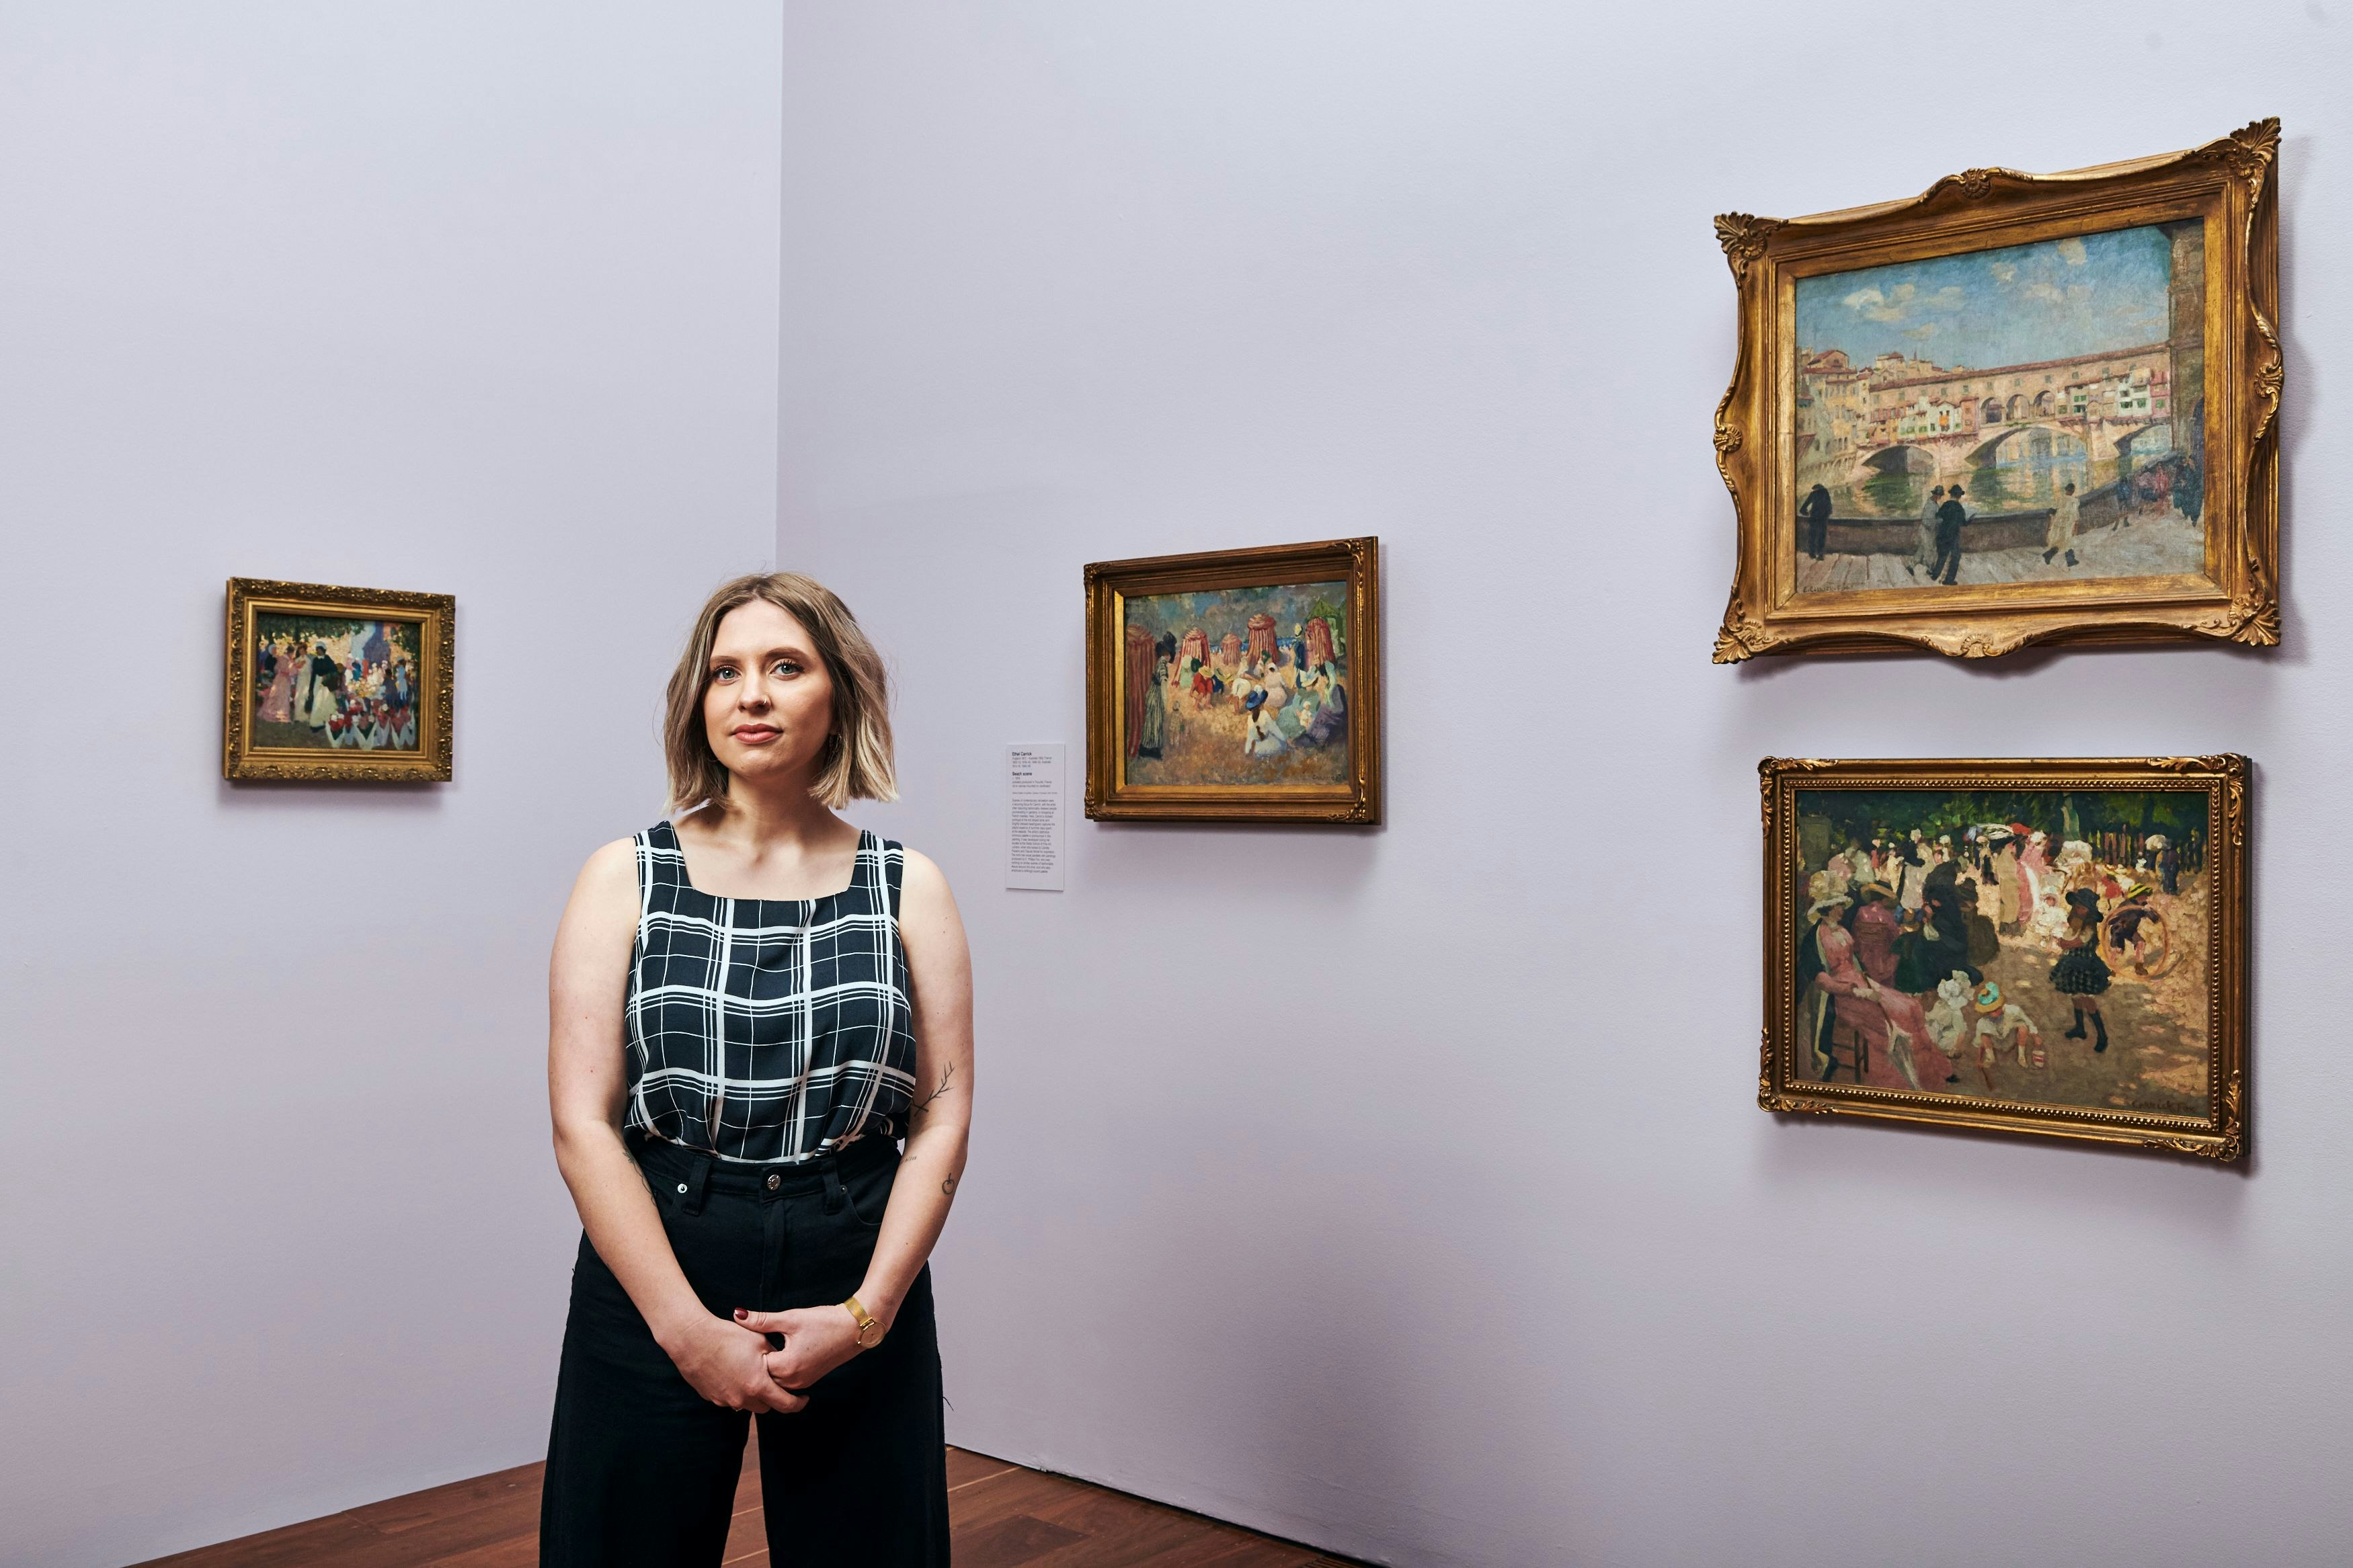 Sophie, curator at NGV Australia